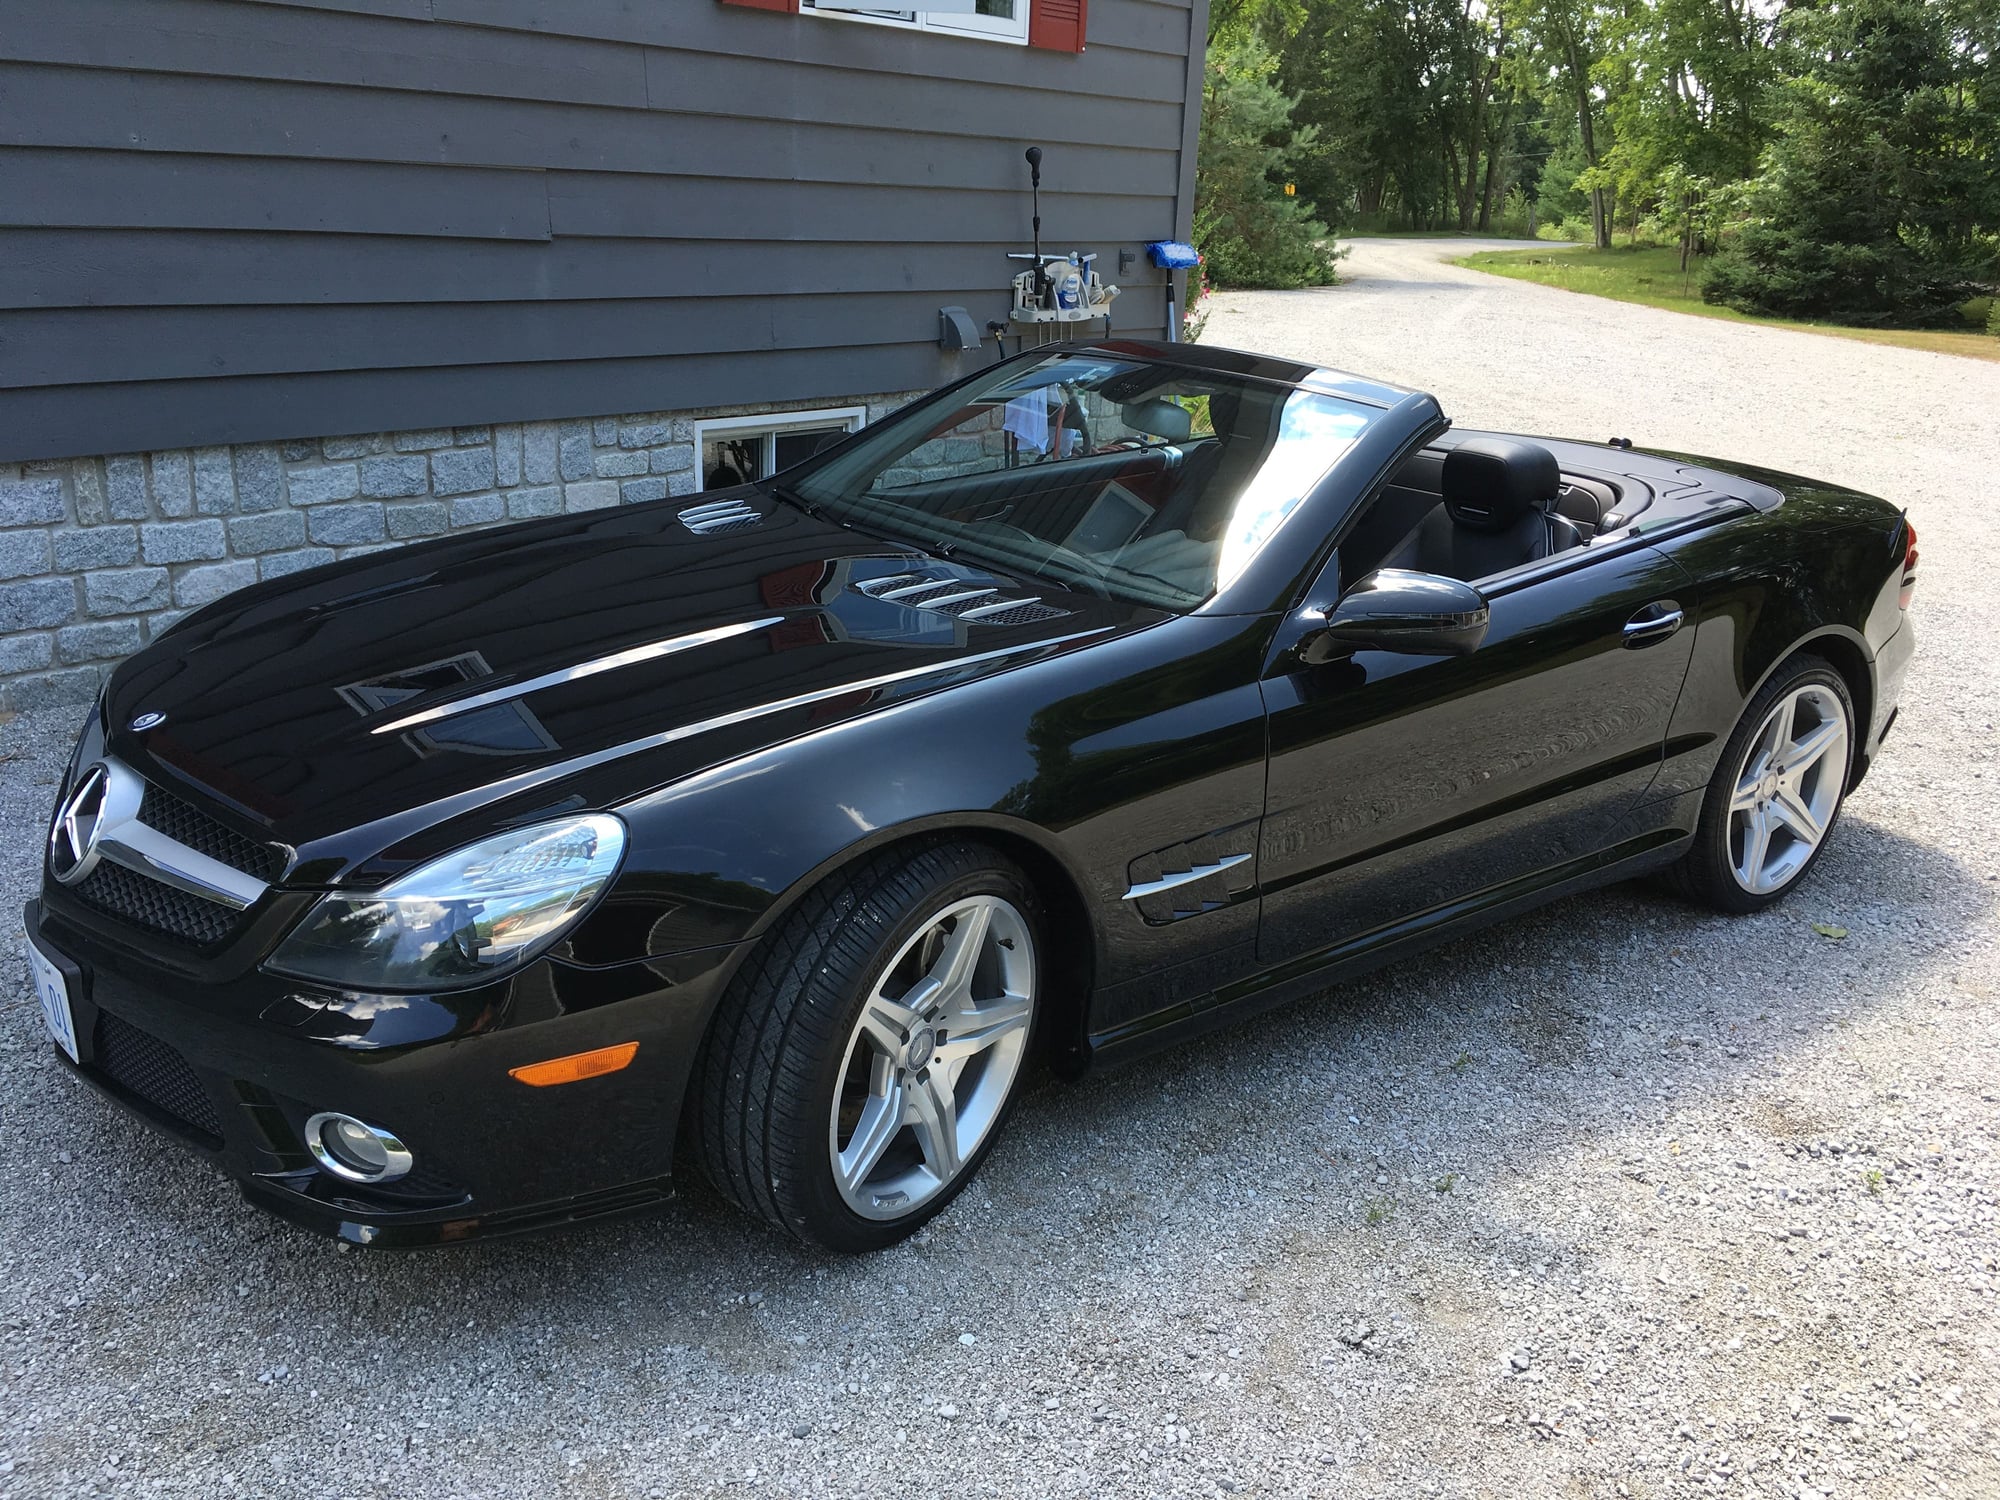 2011 Mercedes-Benz SL550 - 2011 SL550R Excellent condition! - Used - VIN WDBSK7BA2BF166357 - 8 cyl - 2WD - Automatic - Convertible - Black - Washago, ON L0K2B0, Canada